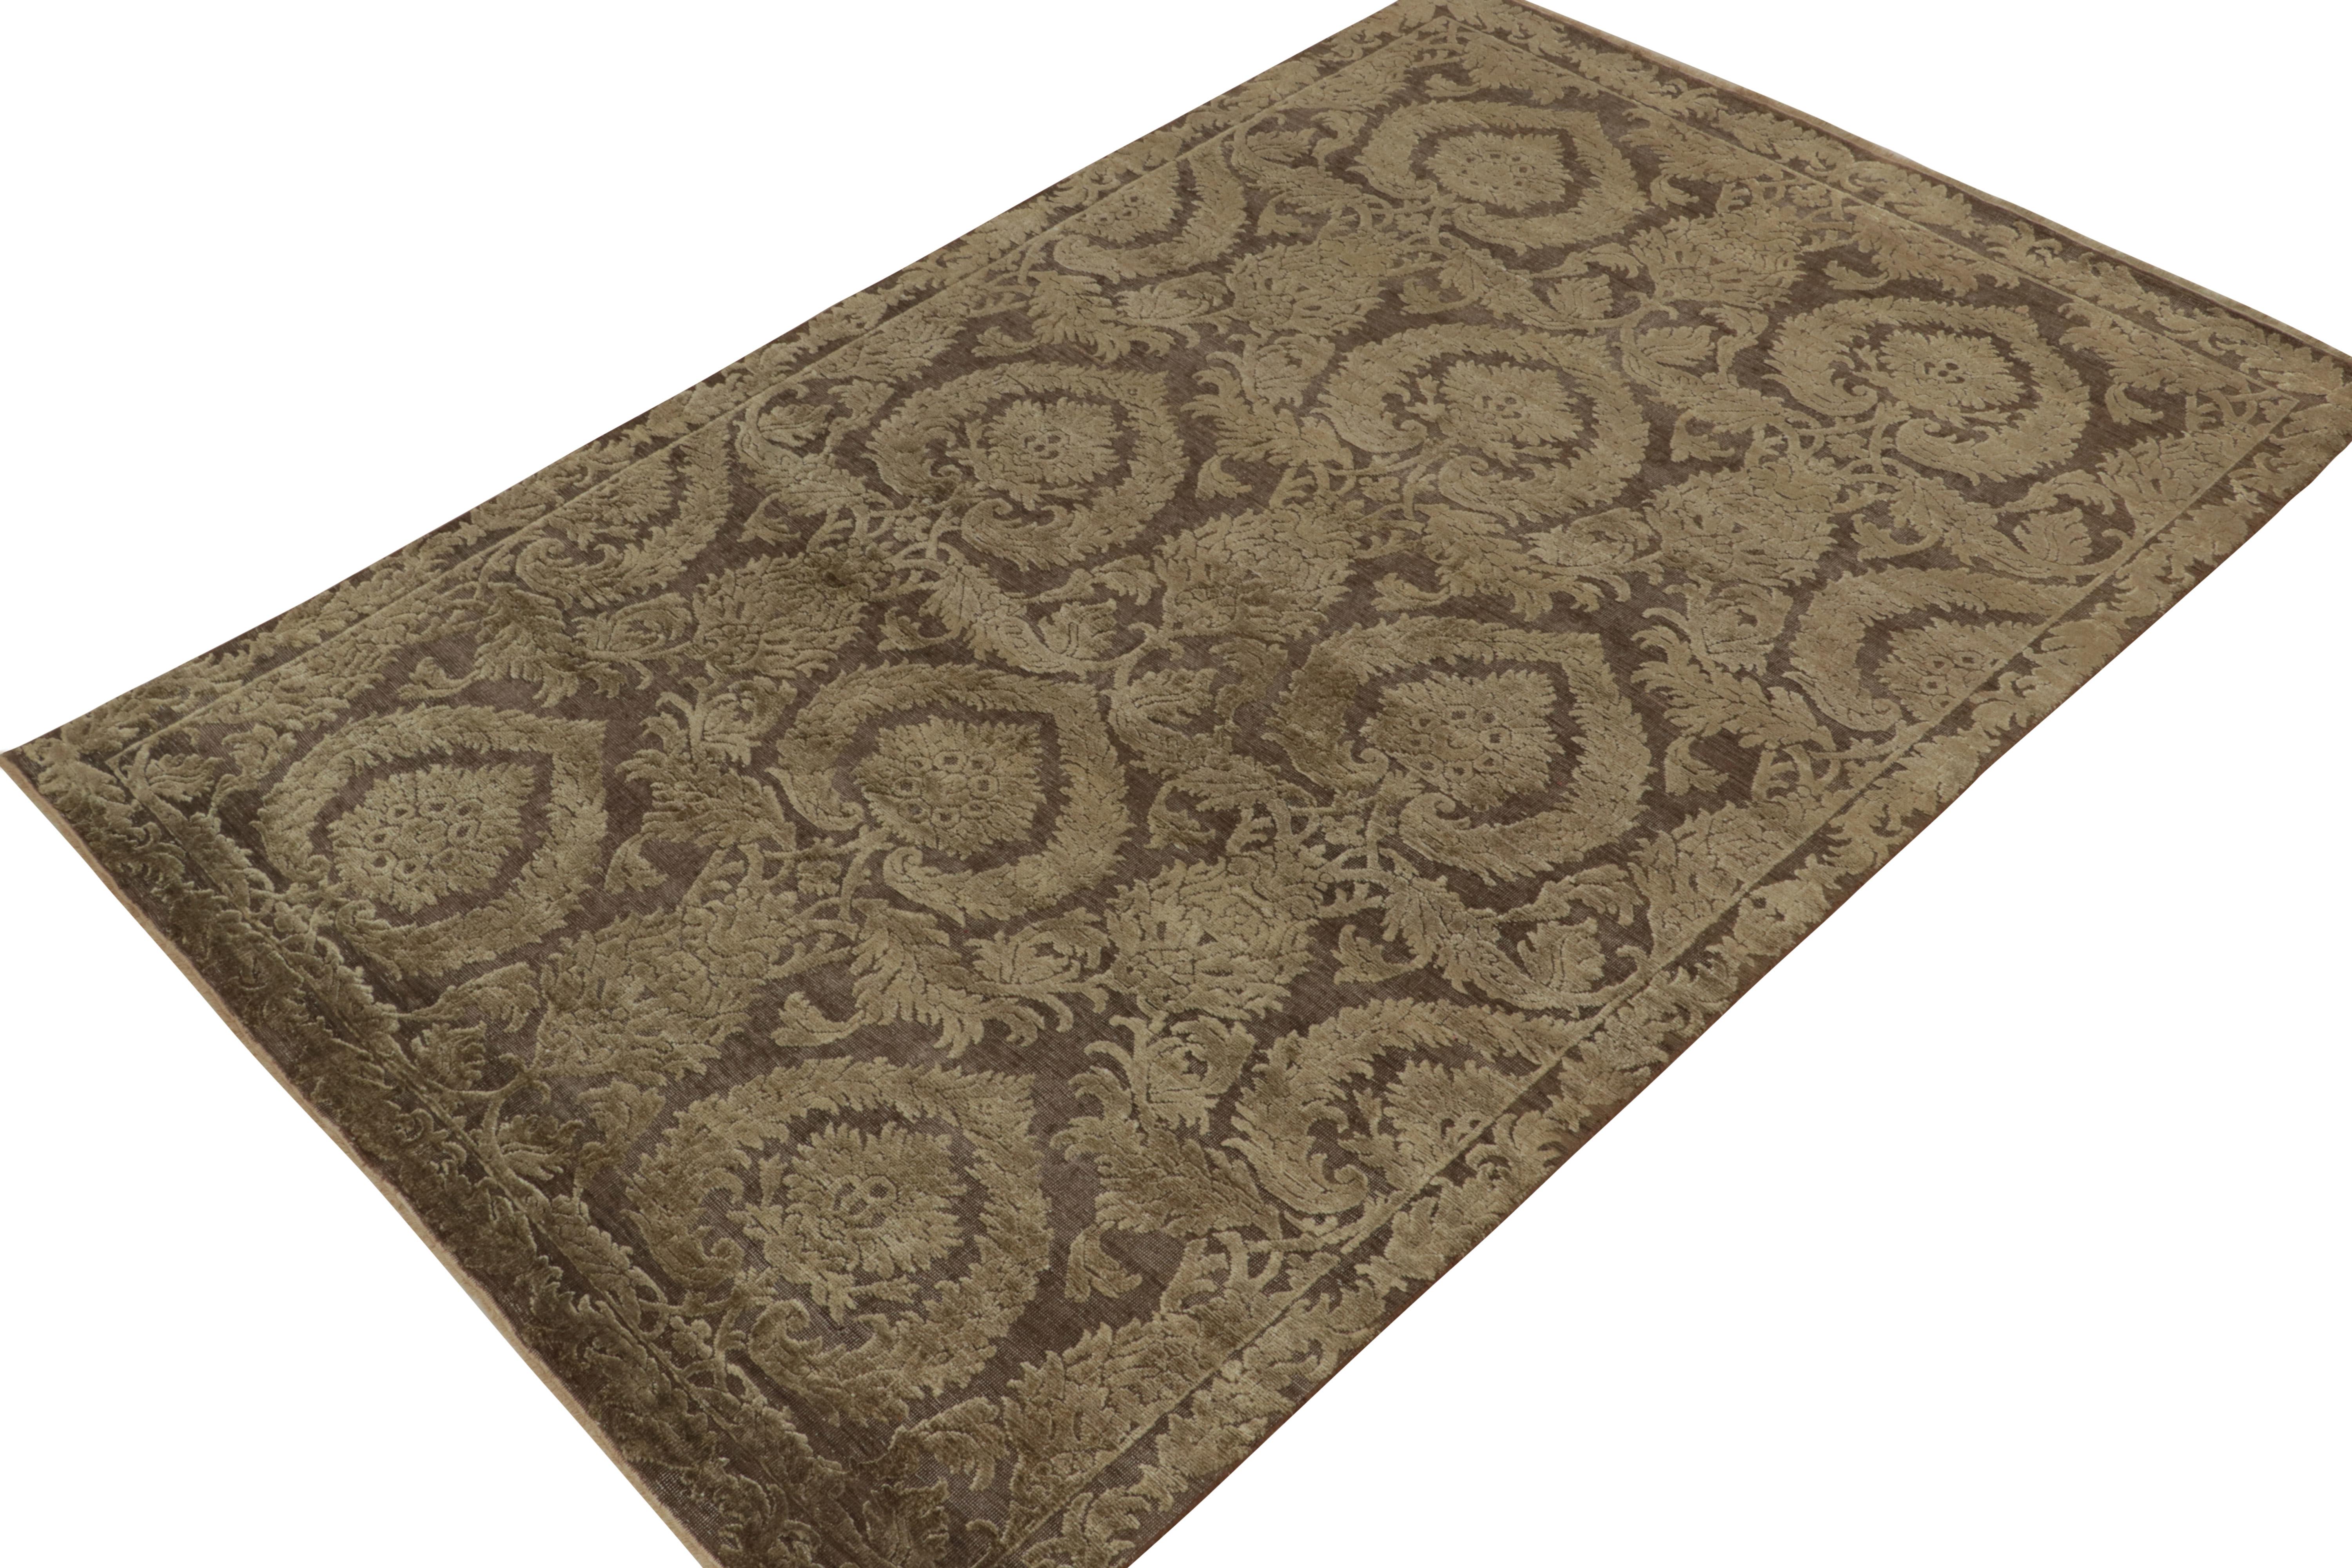 Handknotted in a luxurious blend of wool & silk, this 6x9 contemporary rug from our Modern Classics collection is particularly inspired by classic Italian art styles.

On the Design: An all over floral pattern in luscious beige-brown tones enjoys a